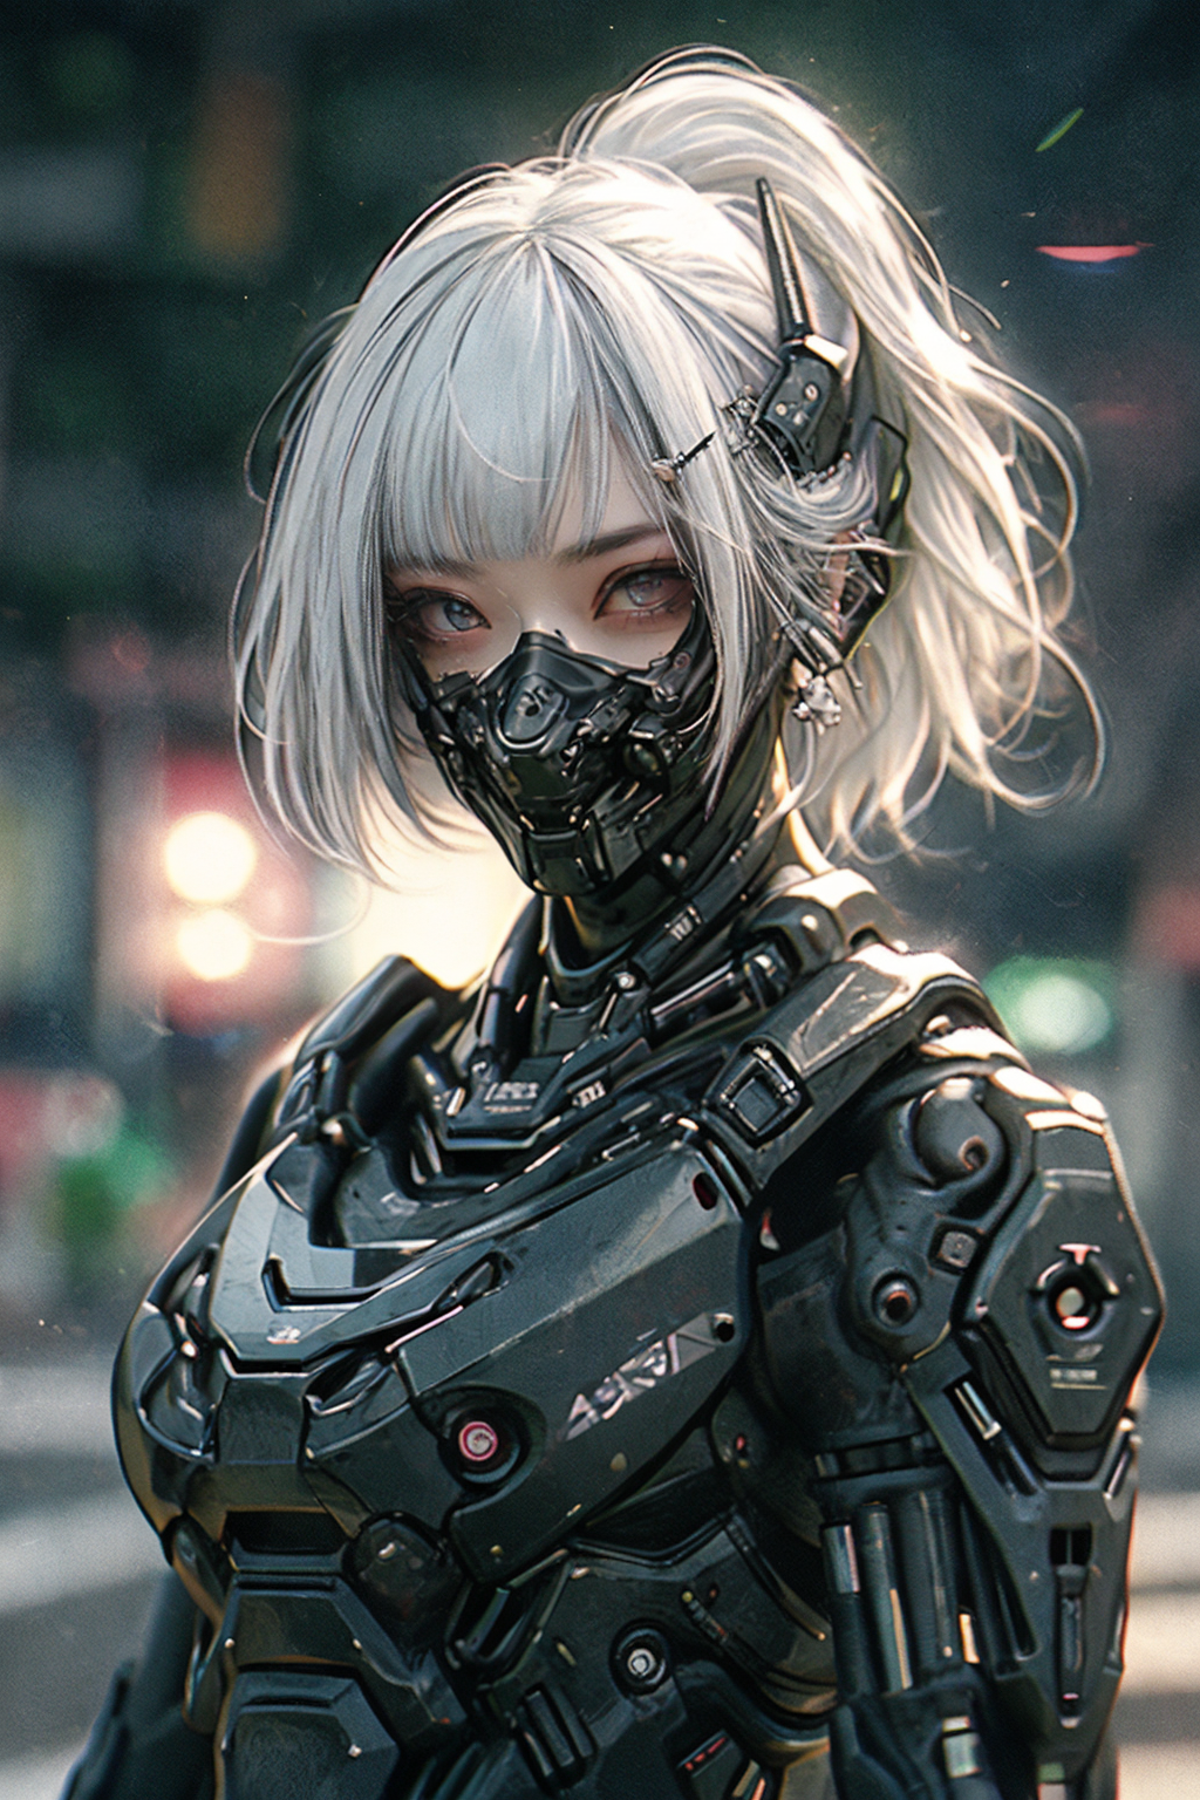 Mecharobot | Clothing + action Style | image by 0_vortex